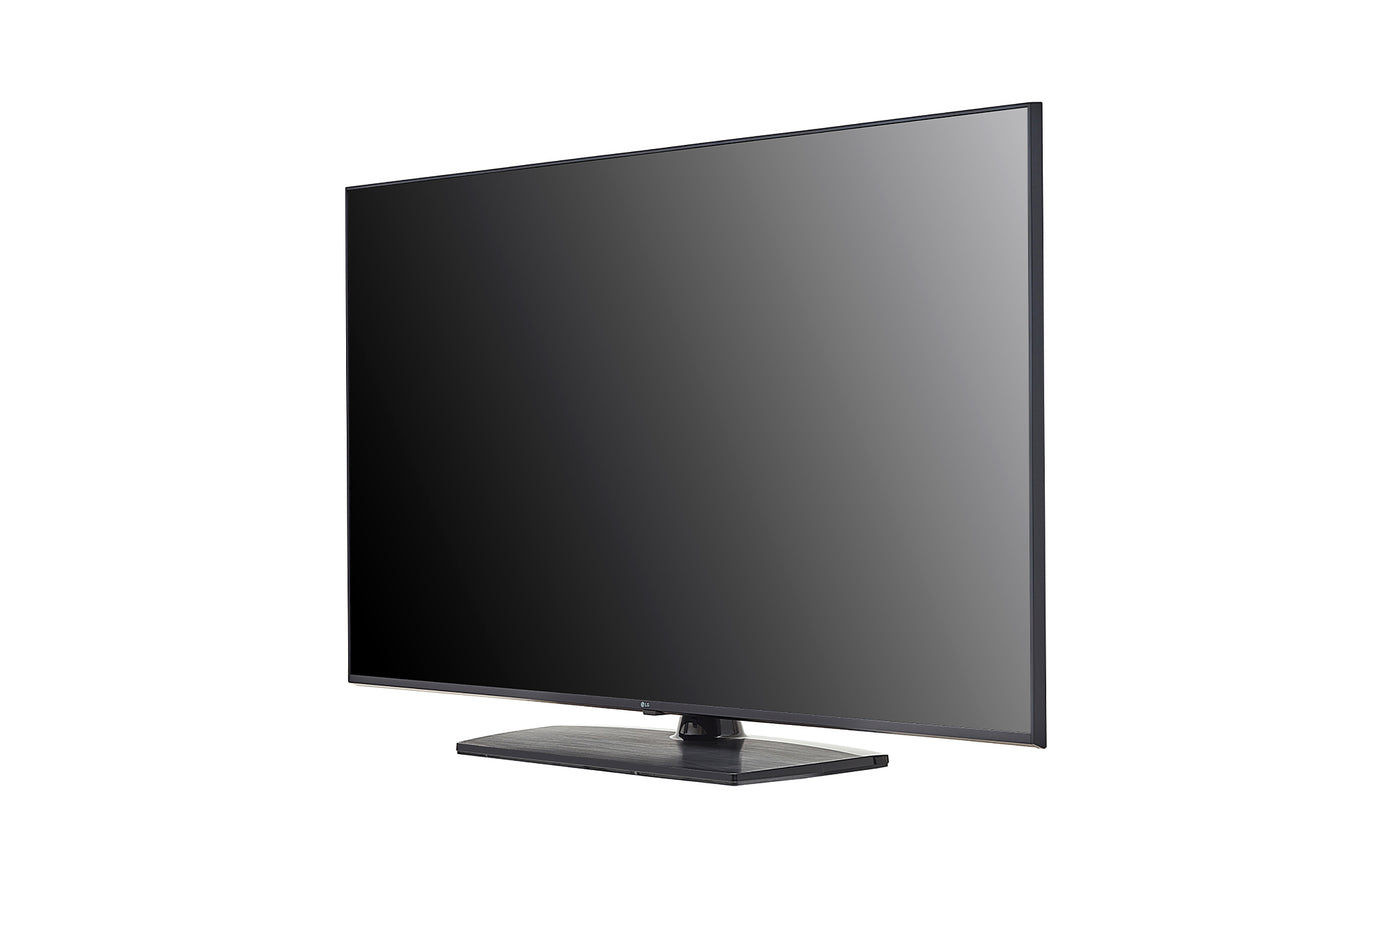 LG 55UN570H 55" 4K UHD Hospitality TV with Pro:Idiom, b-LAN and 2 Year Warranty